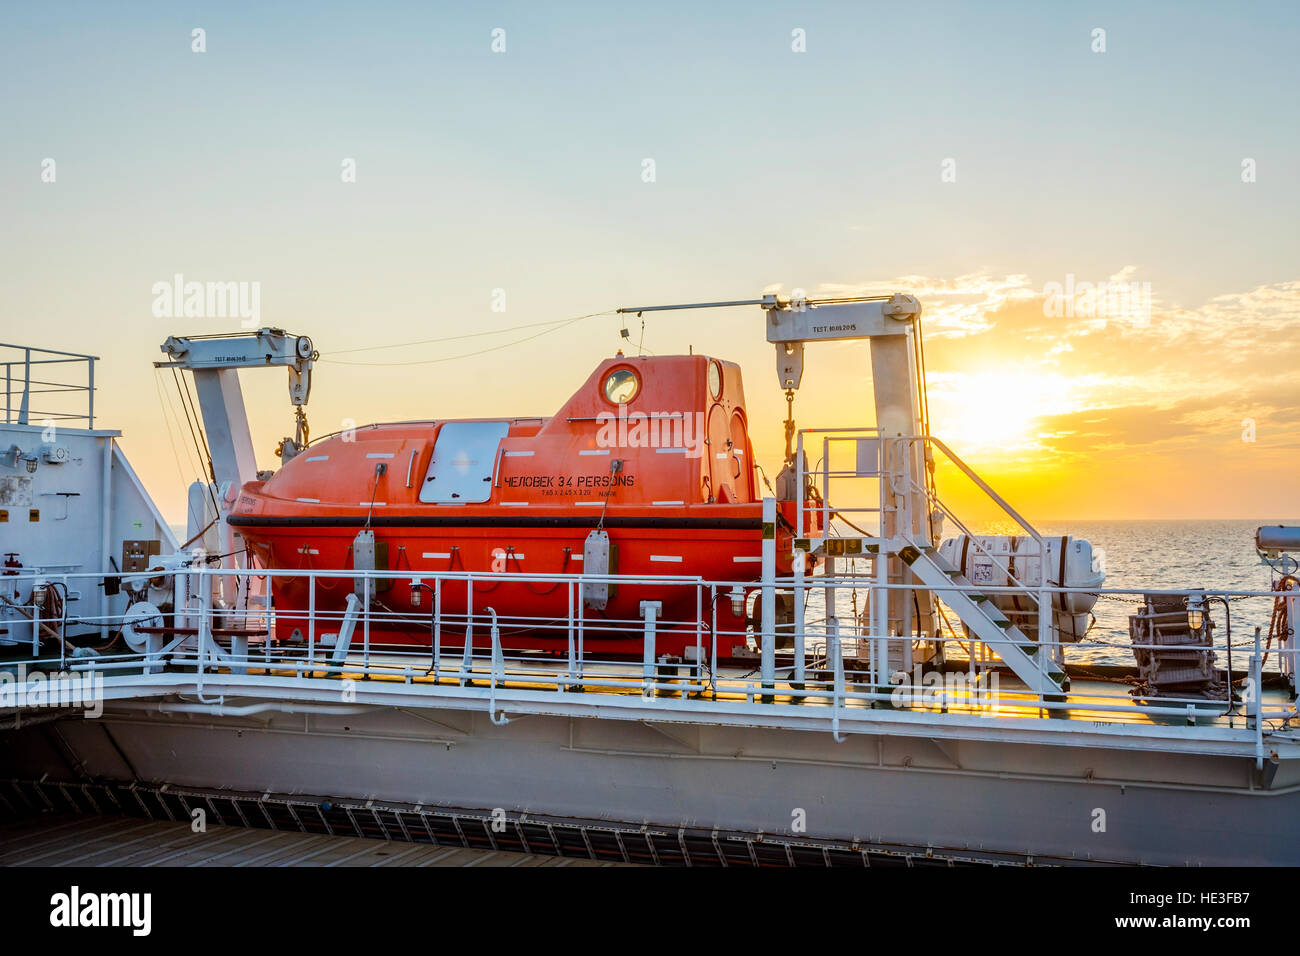 Orange rescue boat on the cargo vessel at the sea in sunset Stock Photo